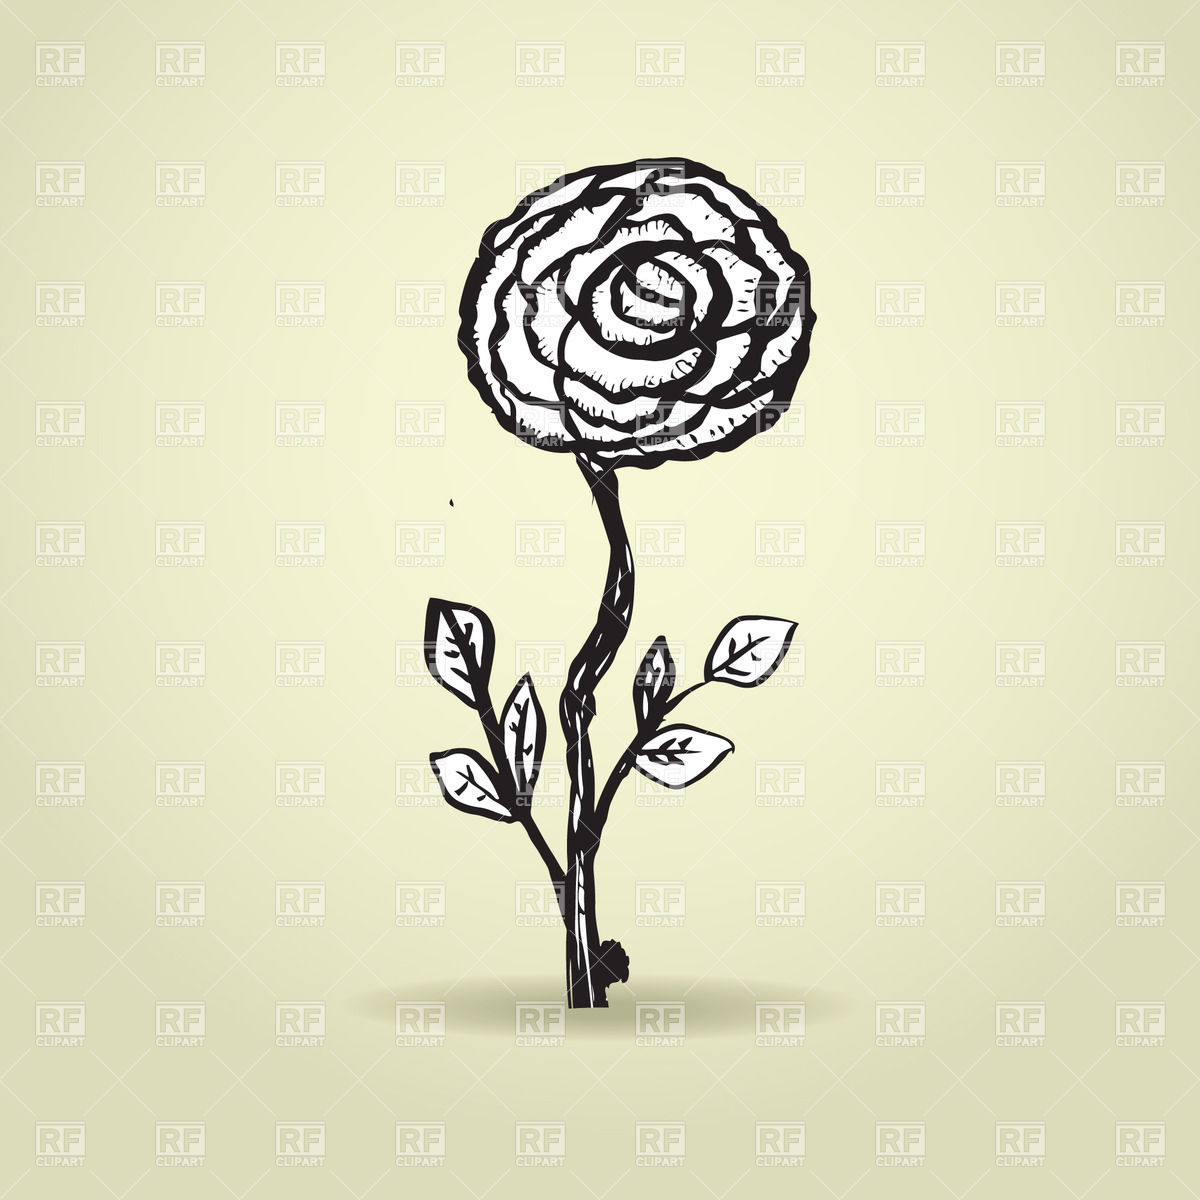 Hand Drawn Sketch Of Rose On Beige Background 21291 Download Royalty    